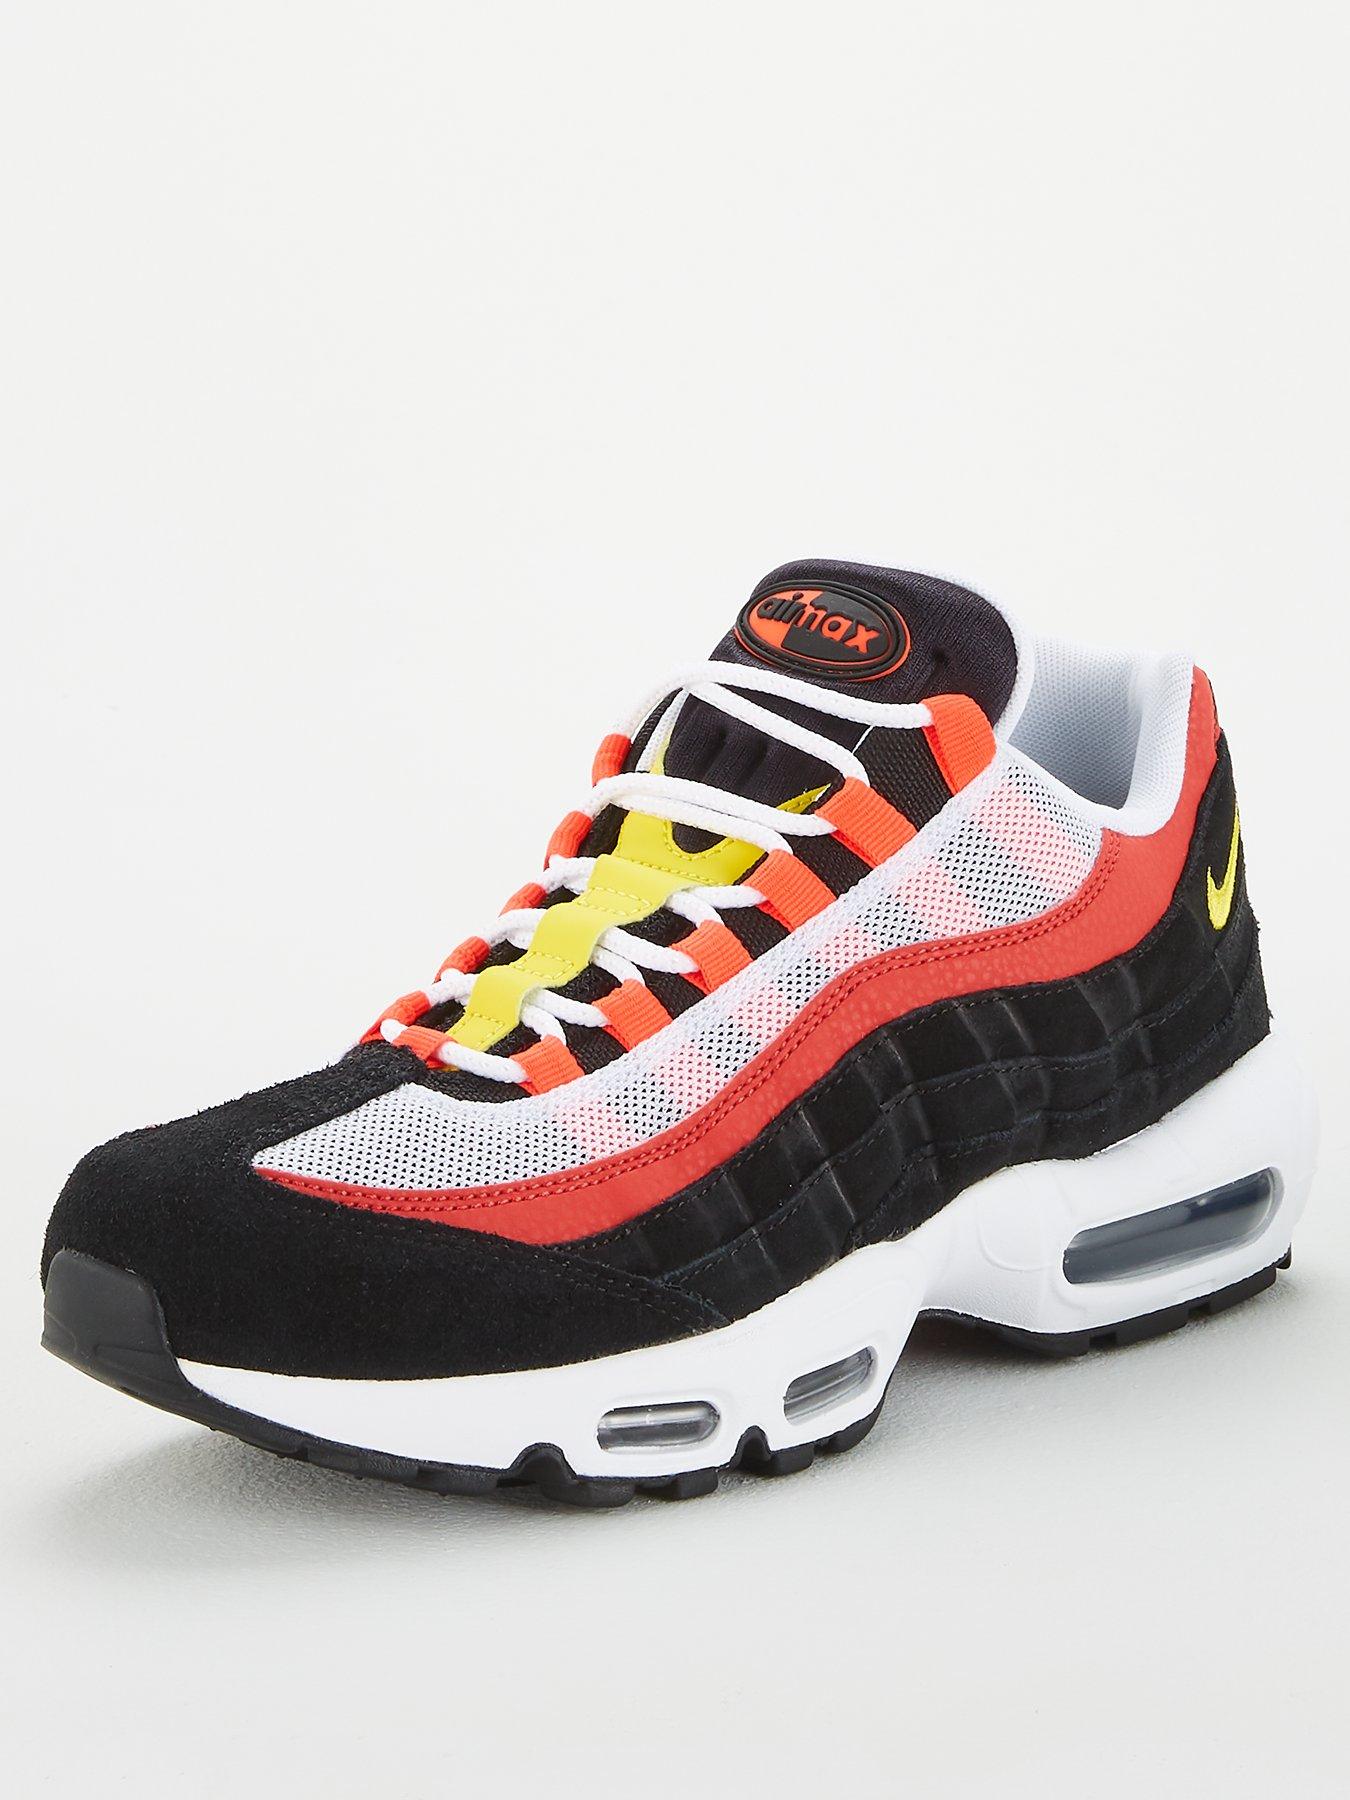 red and black 95